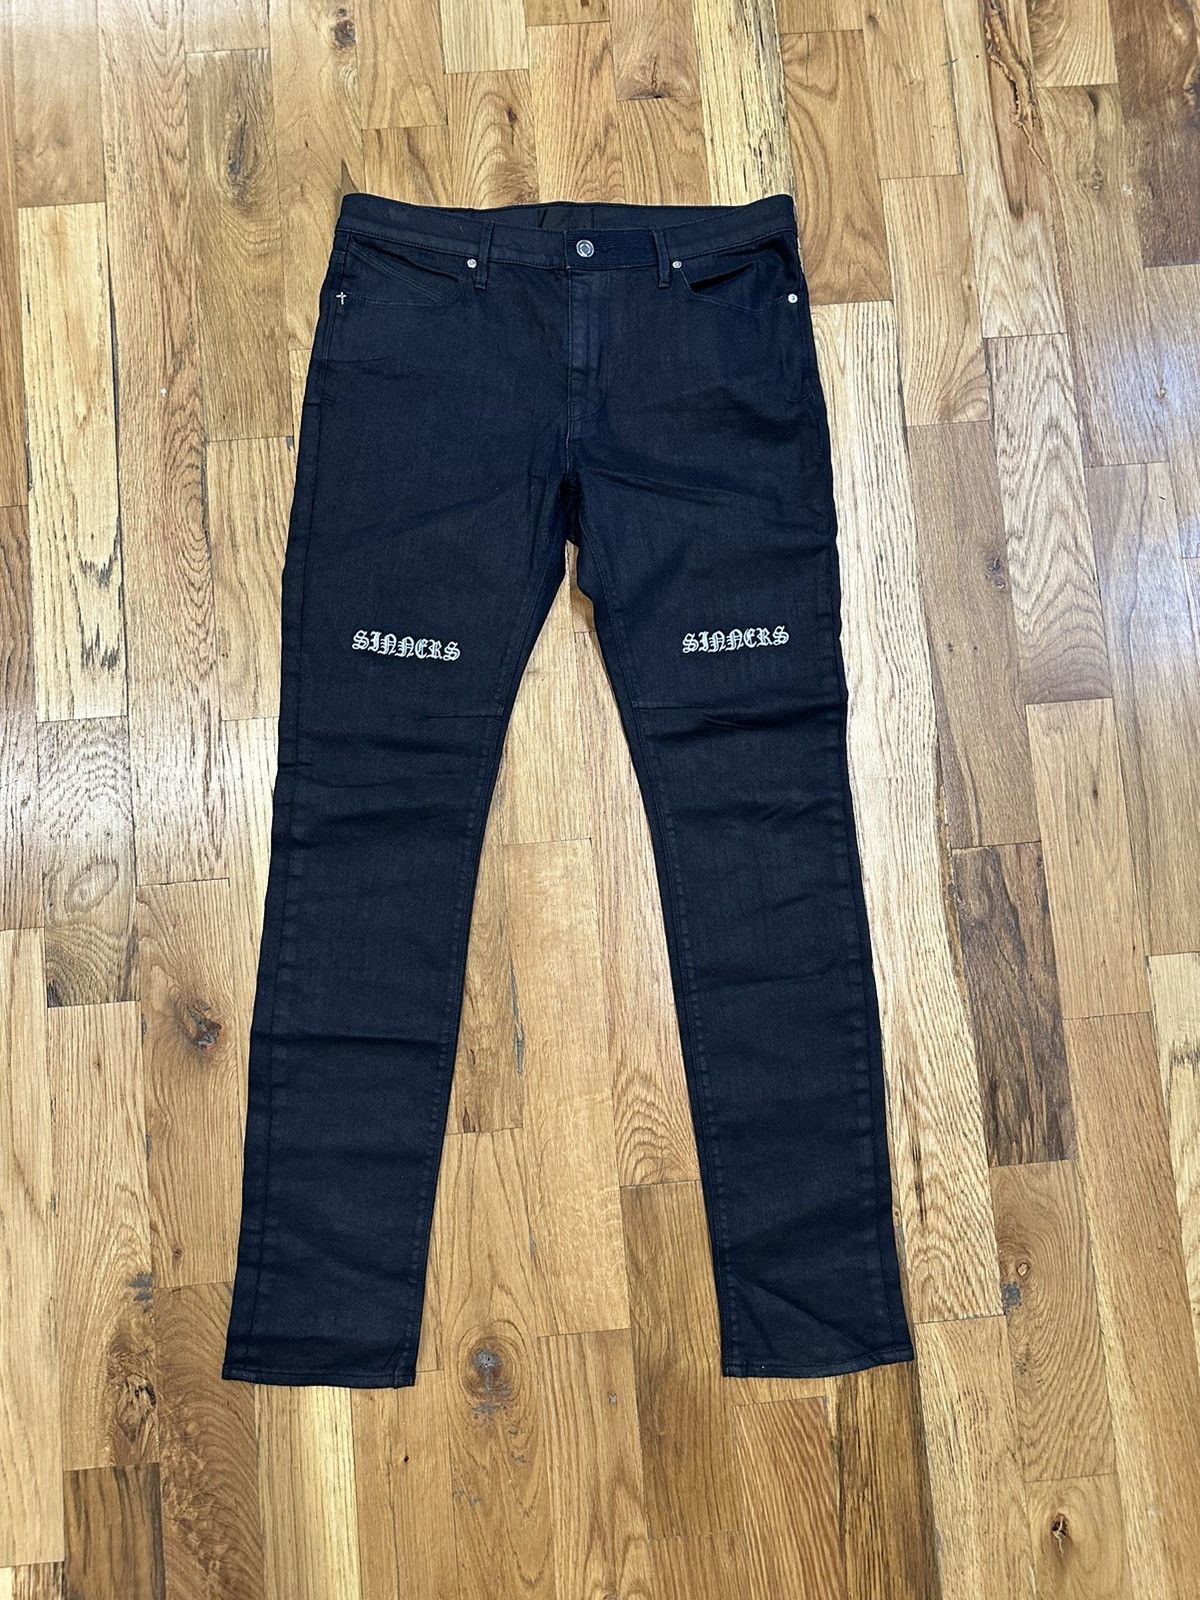 Pre-owned Rta Siners Navy Denim Jeans Size 32